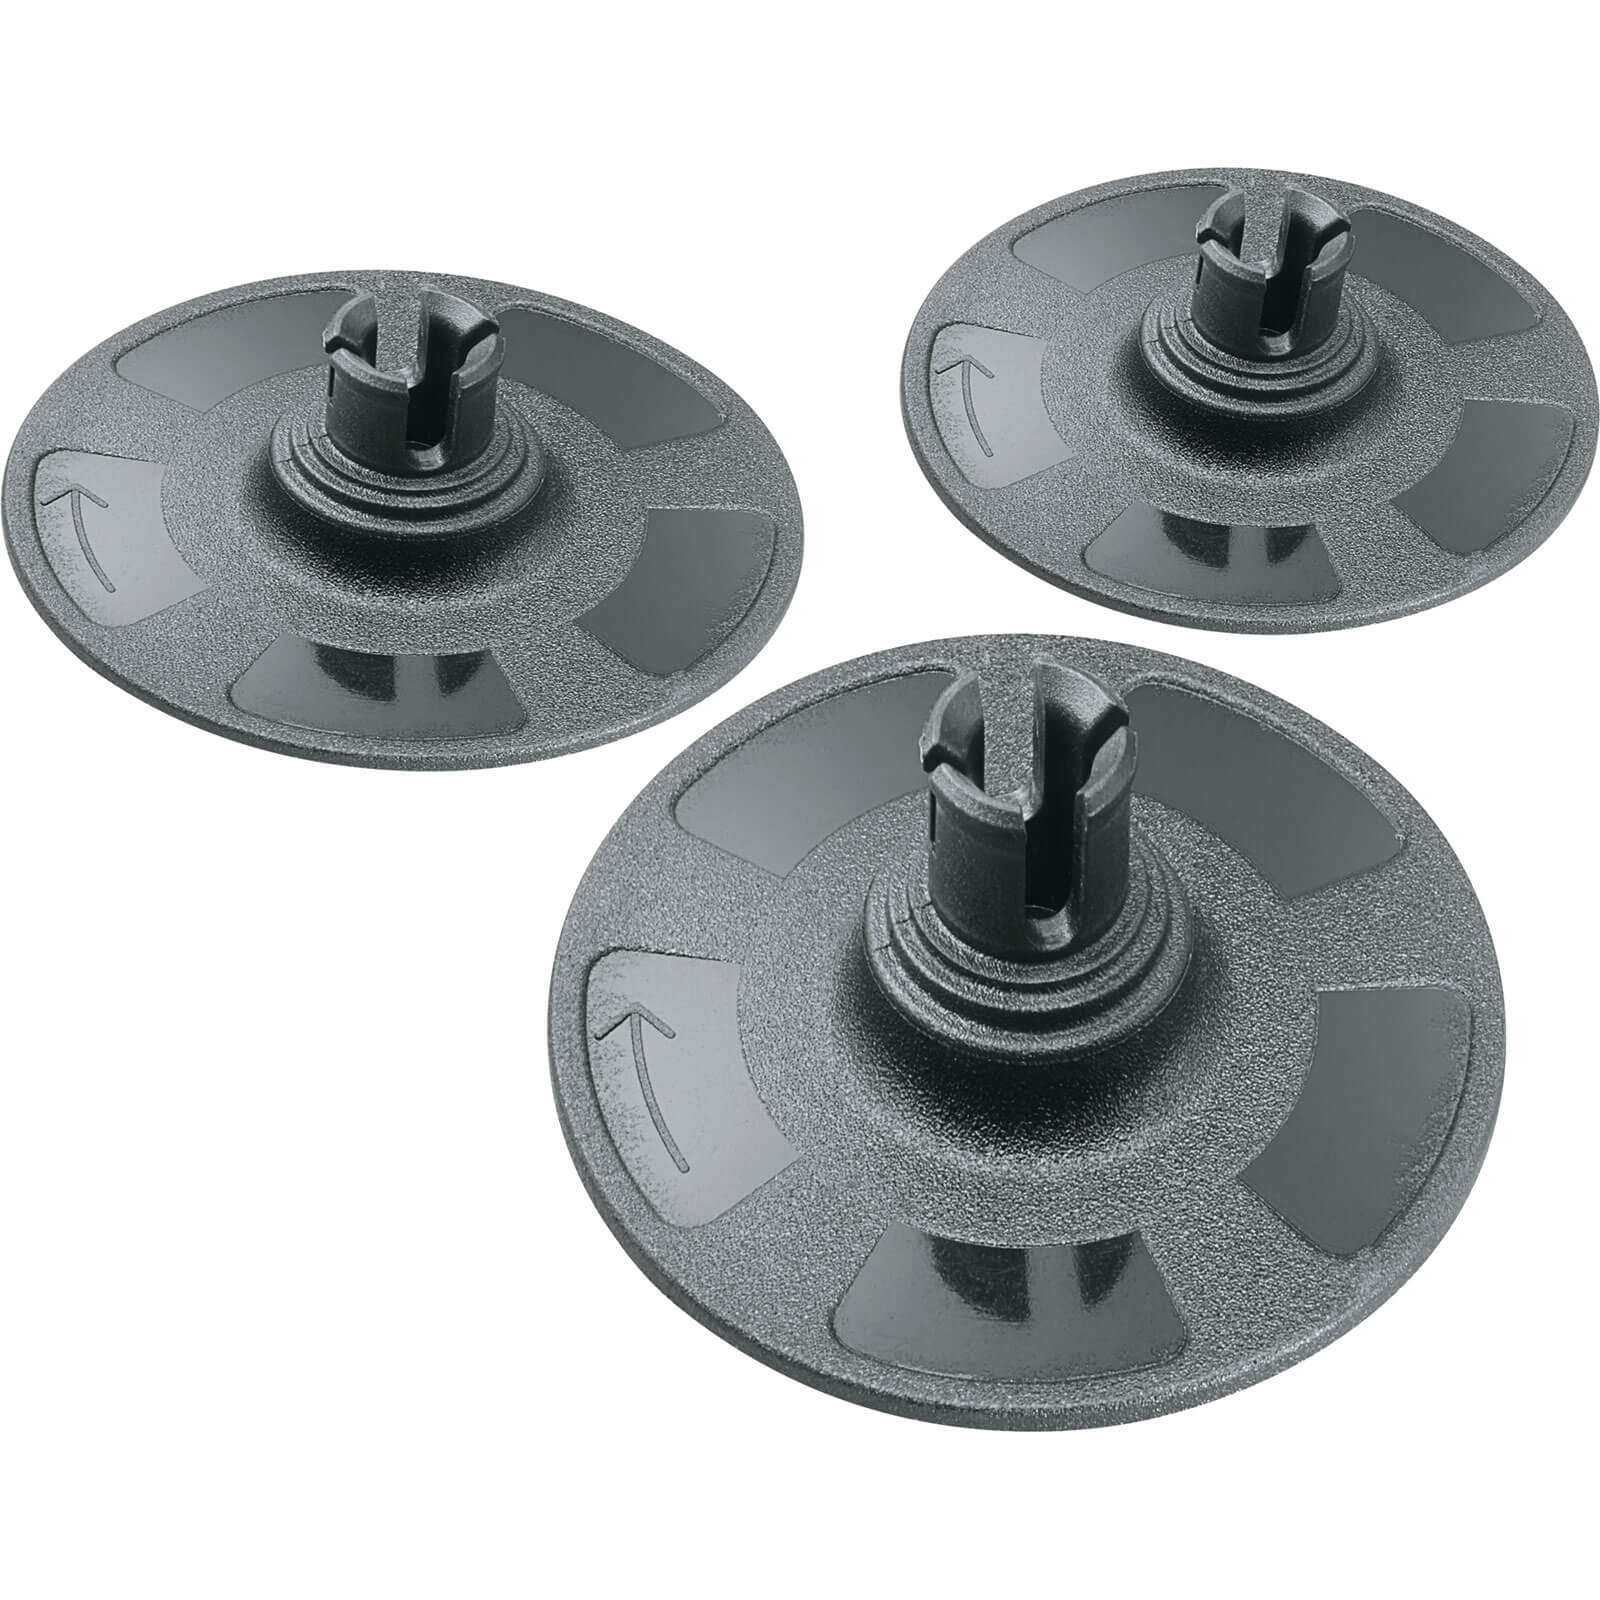 Photos - Abrasive Wheel / Belt Bosch Replacement Pads for EASYCURVSANDER 12 Pack of 3 